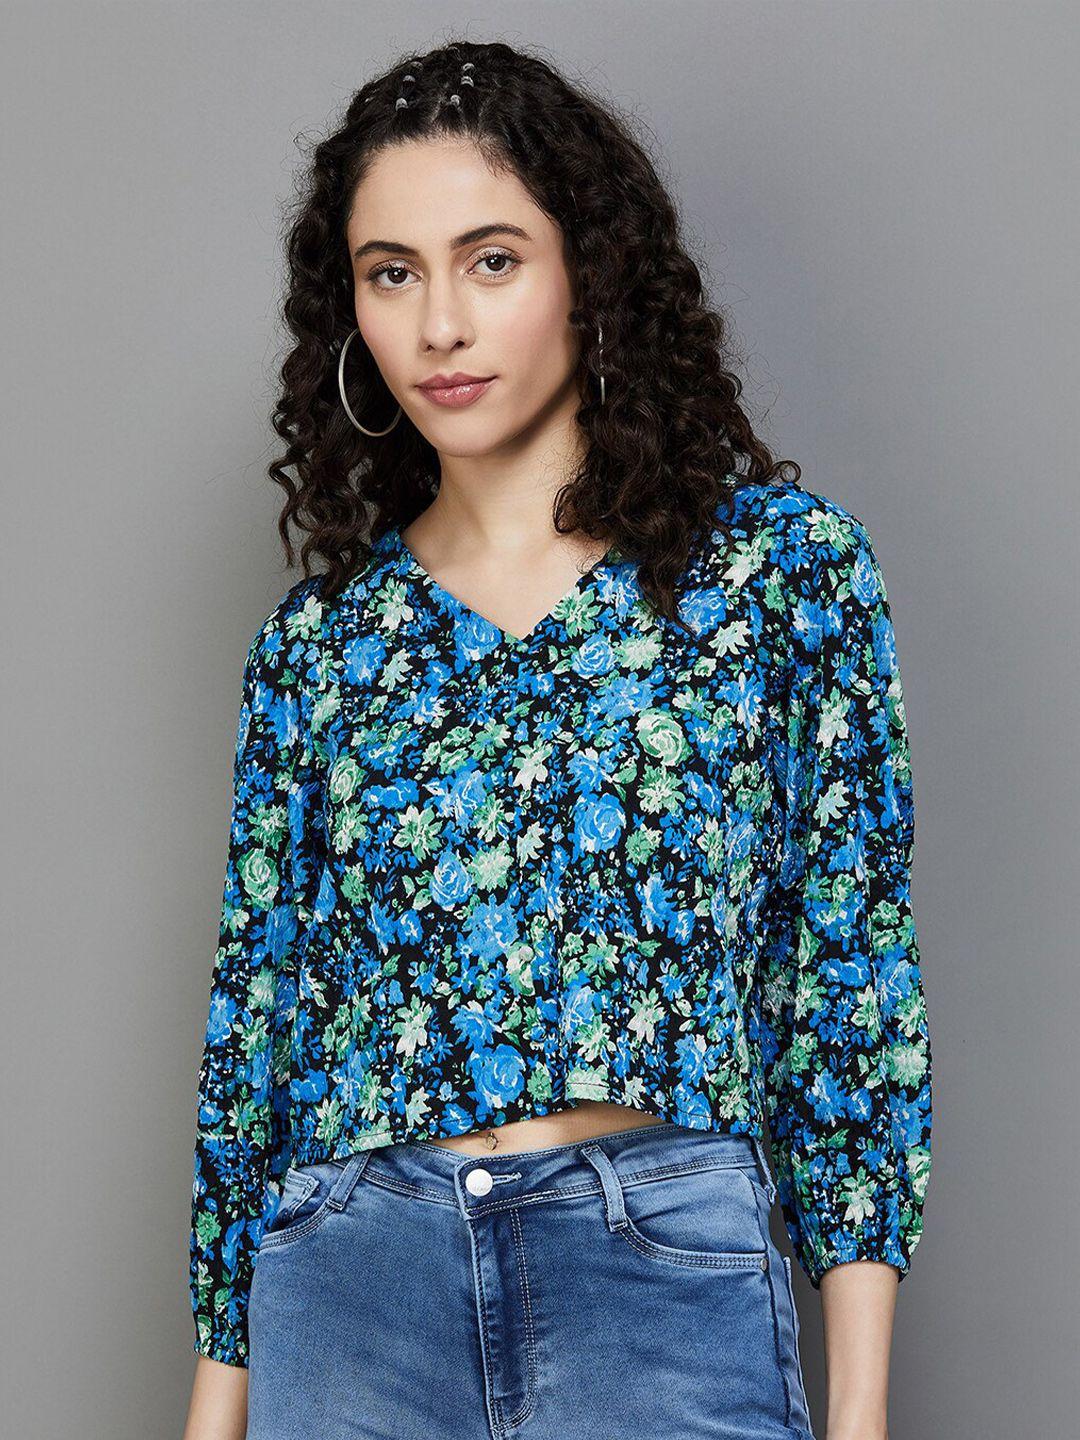 ginger-by-lifestyle-floral-printed-v-neck-puff-sleeves-top